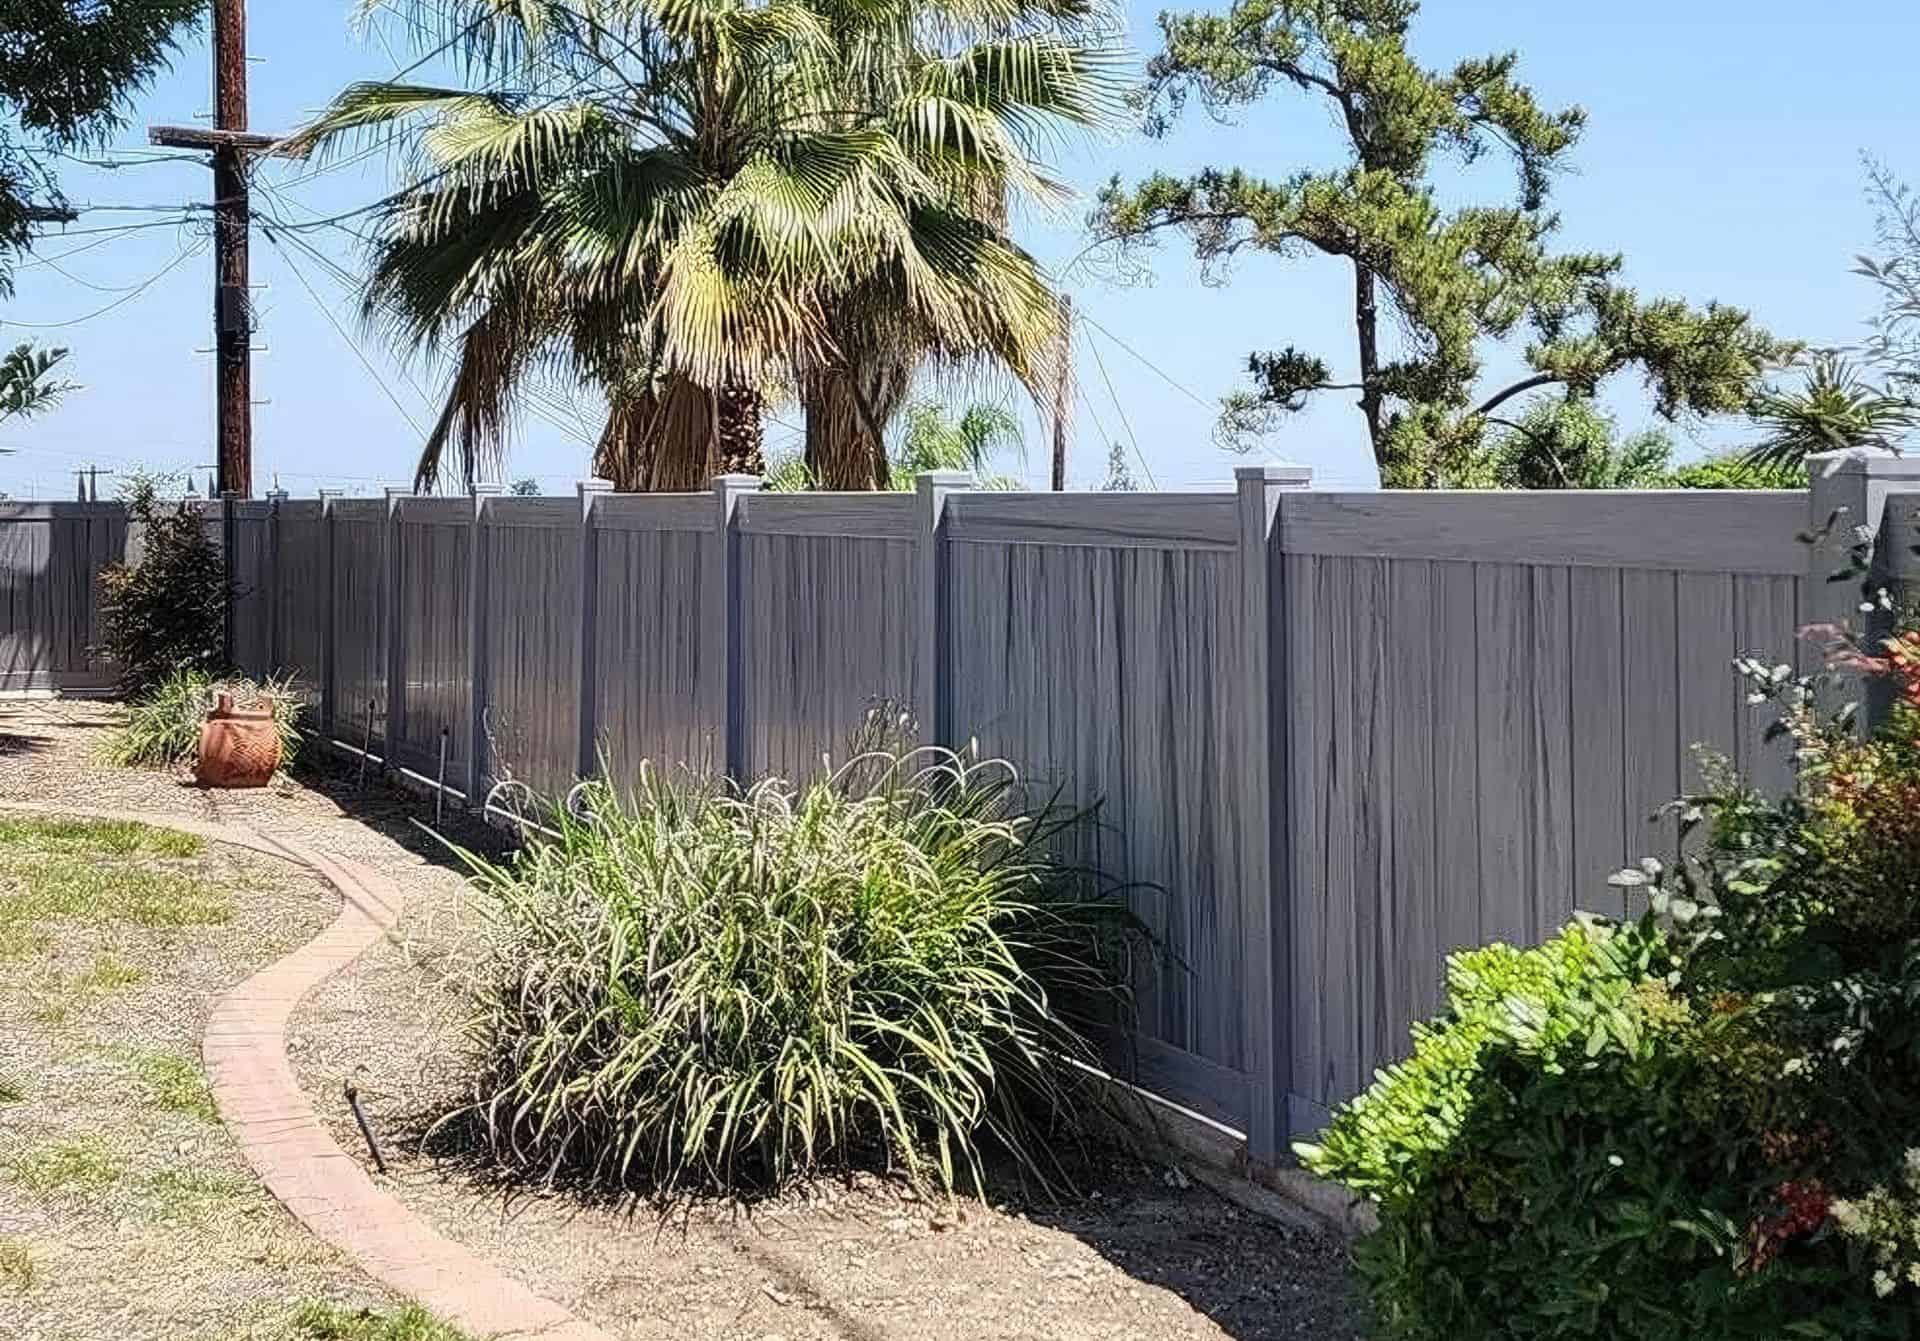 Vinyl coastal cedar colored fence creating boundary around the h backyard with dry grass lawn, small bushes and hedges, and trees in the background.